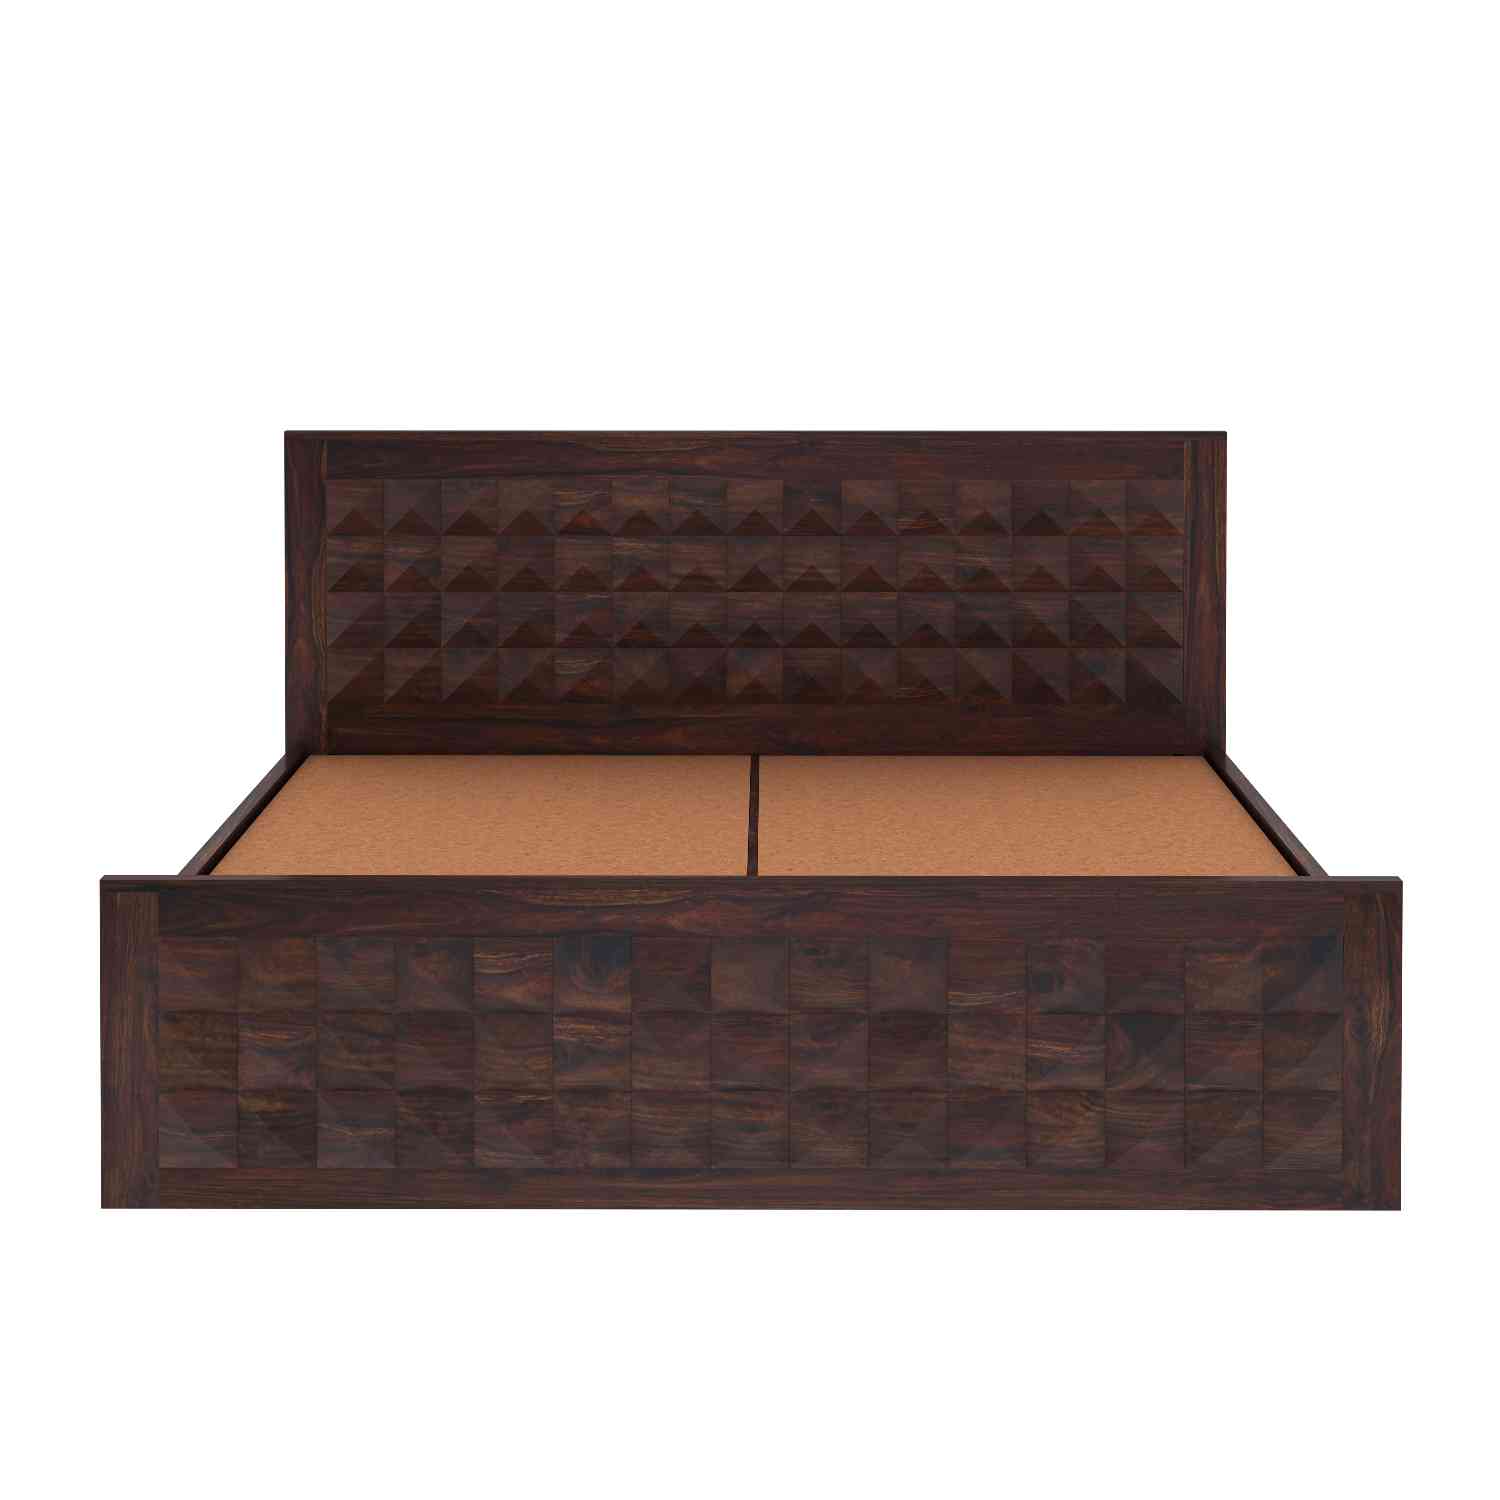 Sofia Solid Sheesham Wood Bed With Box Storage (Queen Size, Walnut Finish)